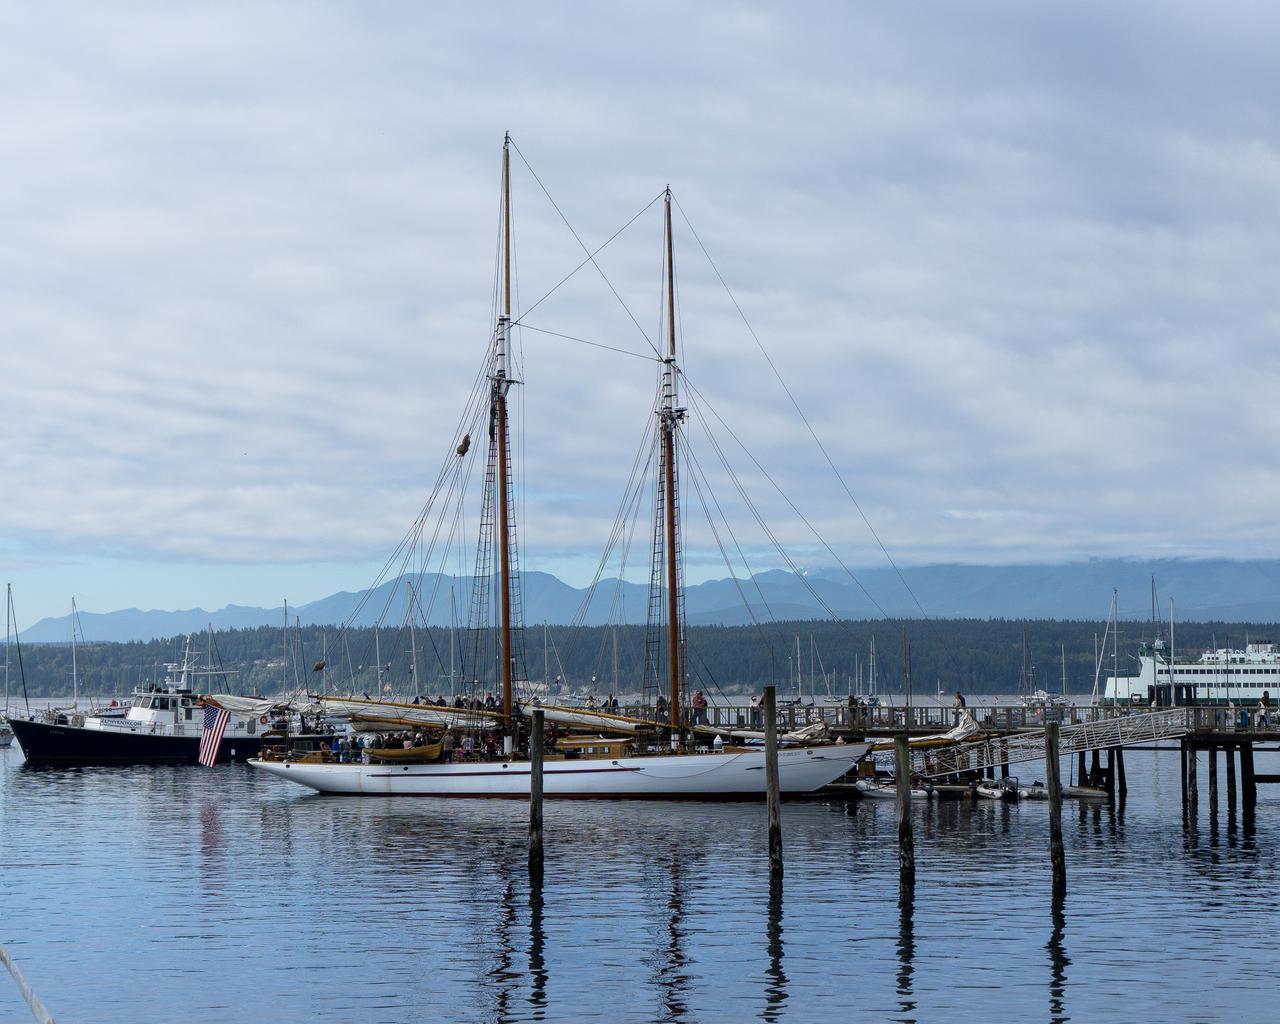 Port Townsend is noted for its Victorian architecture, sits at the top of the Olympic Peninsula, close to the Olympic National Park and 55 miles from Seattle.